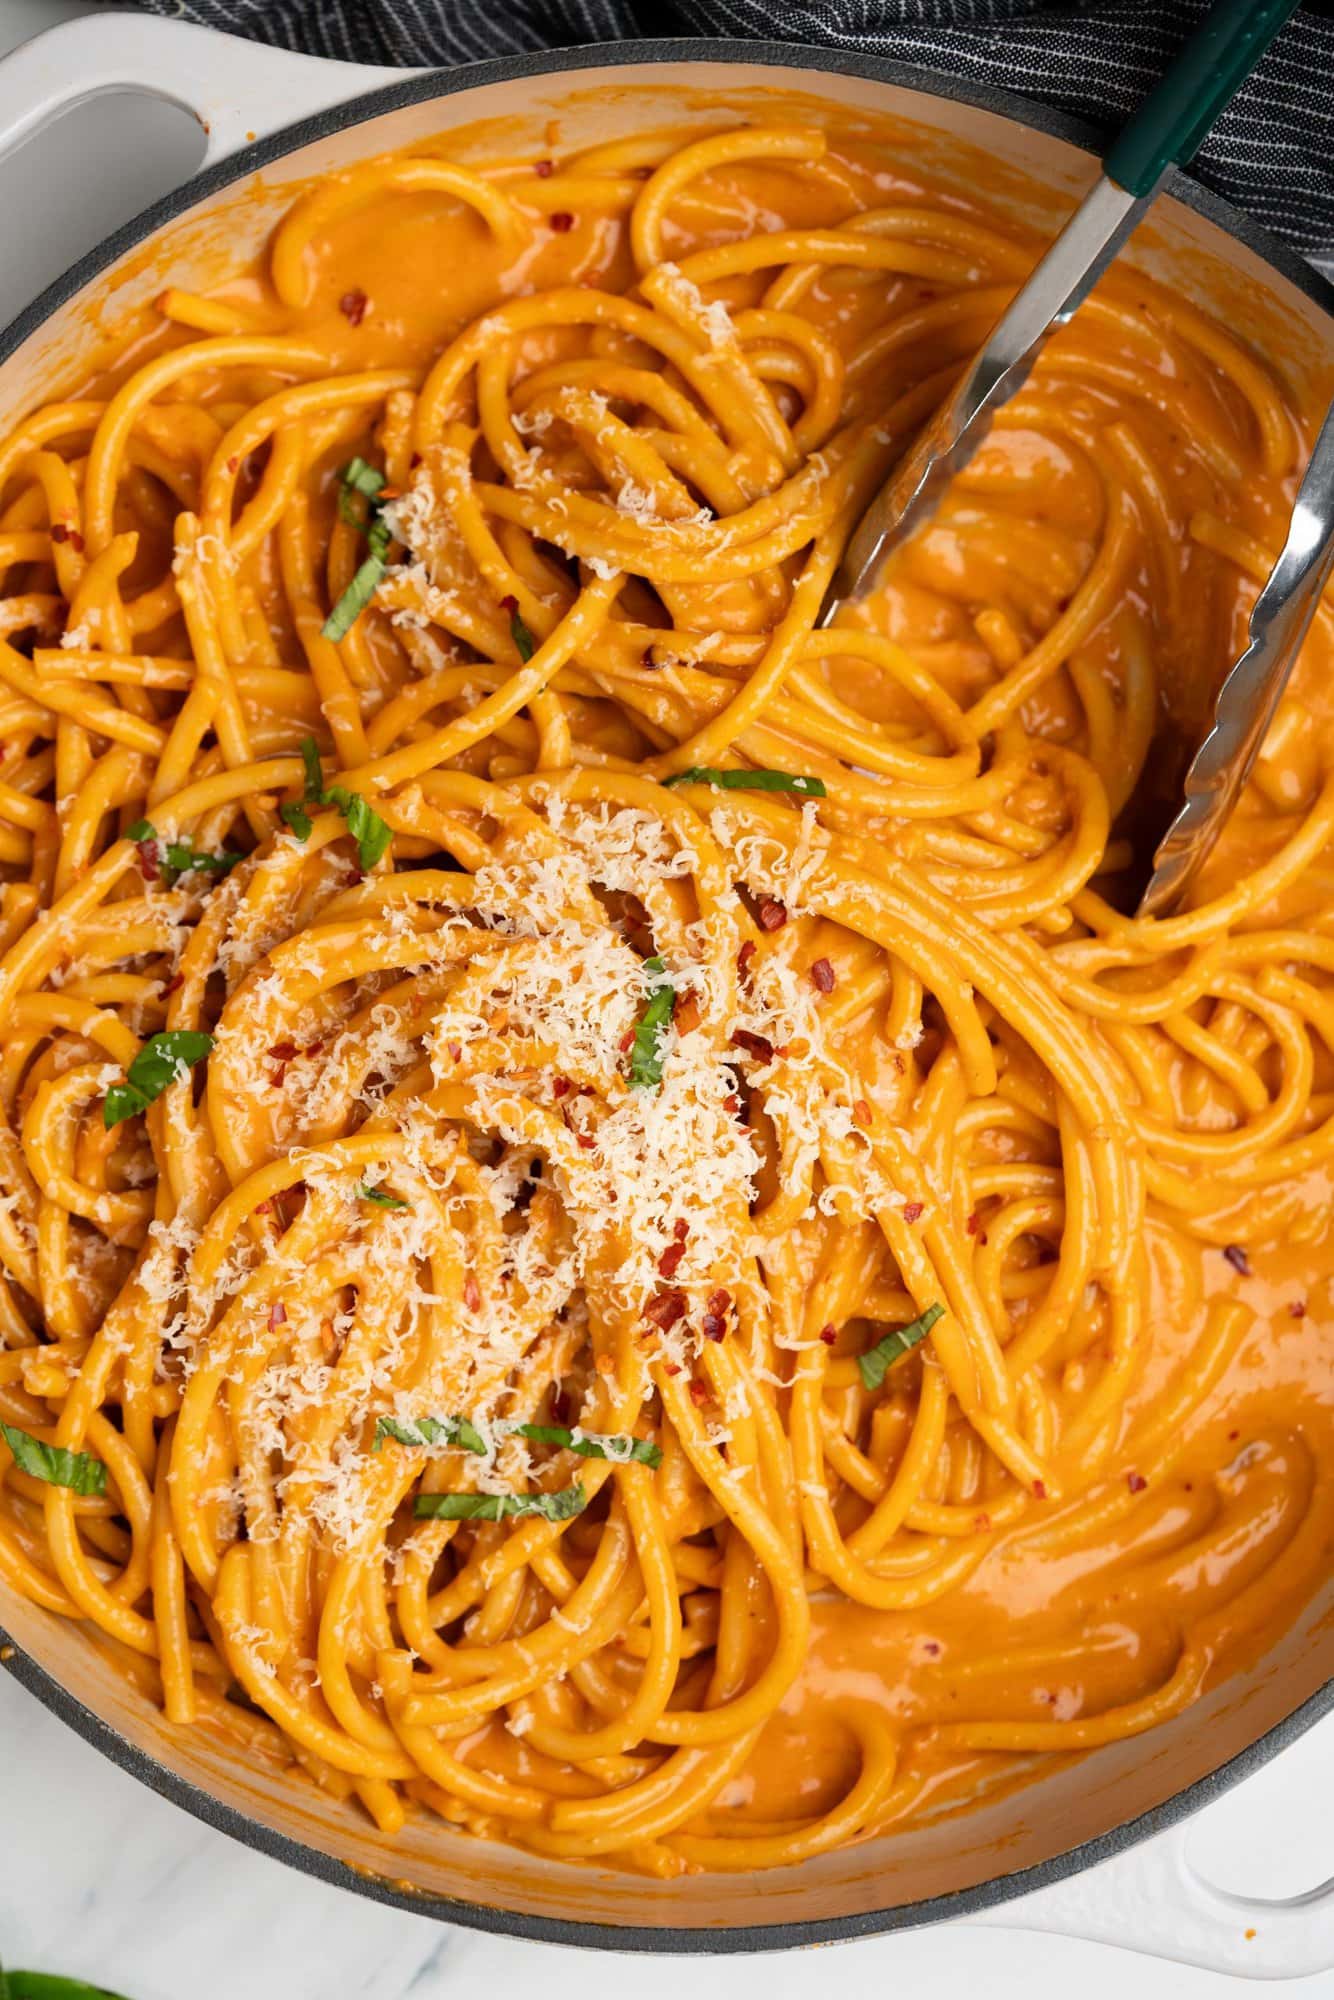 Saucy red bell pepper pasta with a creamy sauce and grated parmesan sprinkled on top.